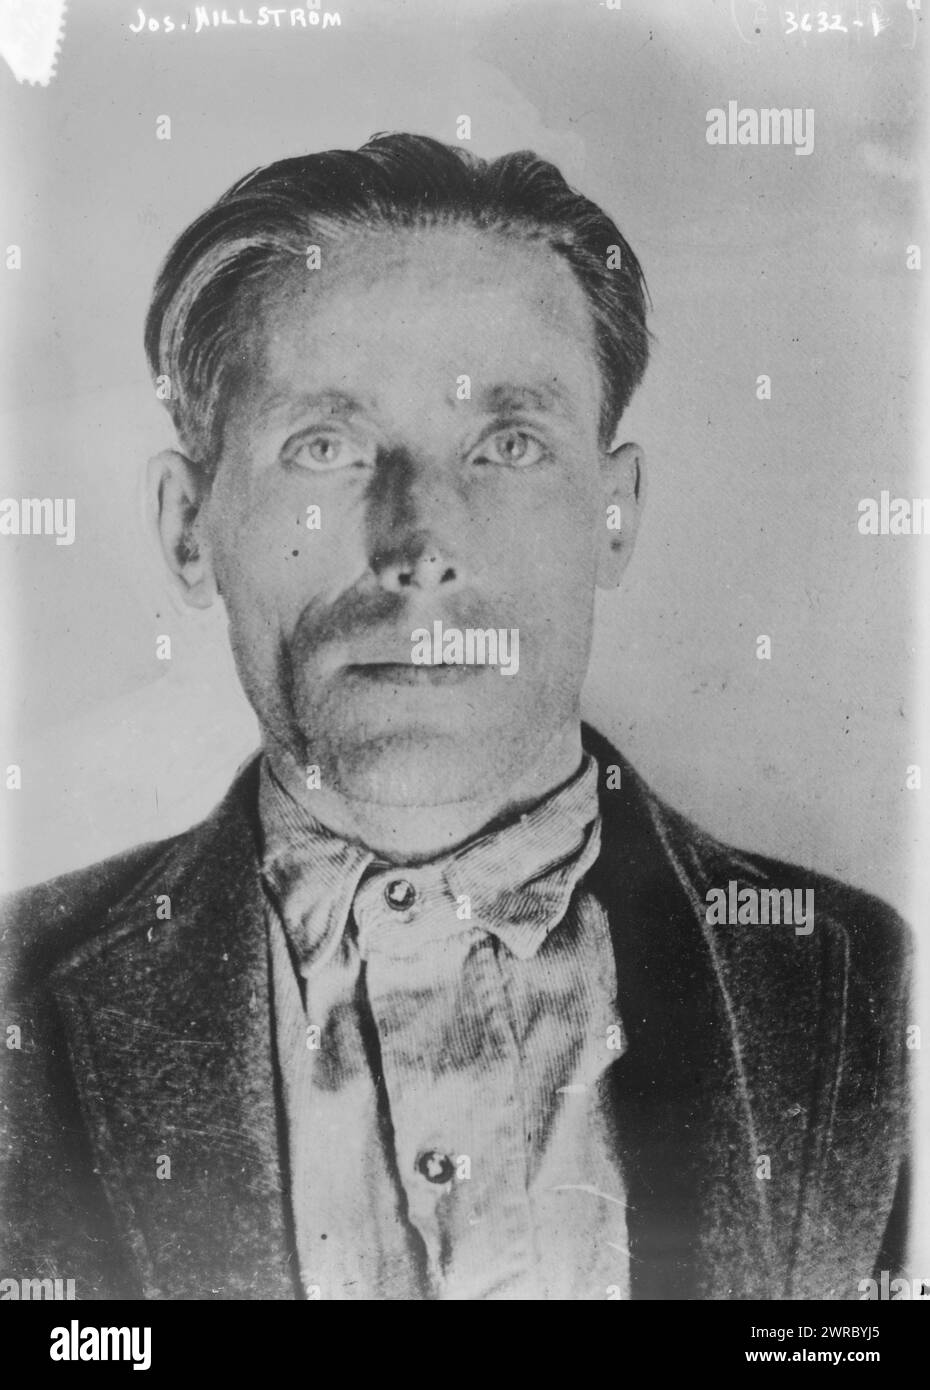 Jos. Hillstrom, Photograph shows Joe Hill (1879-1915), born Joel Emmanuel Hägglund and also known as Joseph Hillström, a Swedish-American labor activist who was accused of murder and executed in 1915., between ca. 1910 and ca. 1915, Glass negatives, 1 negative: glass Stock Photo